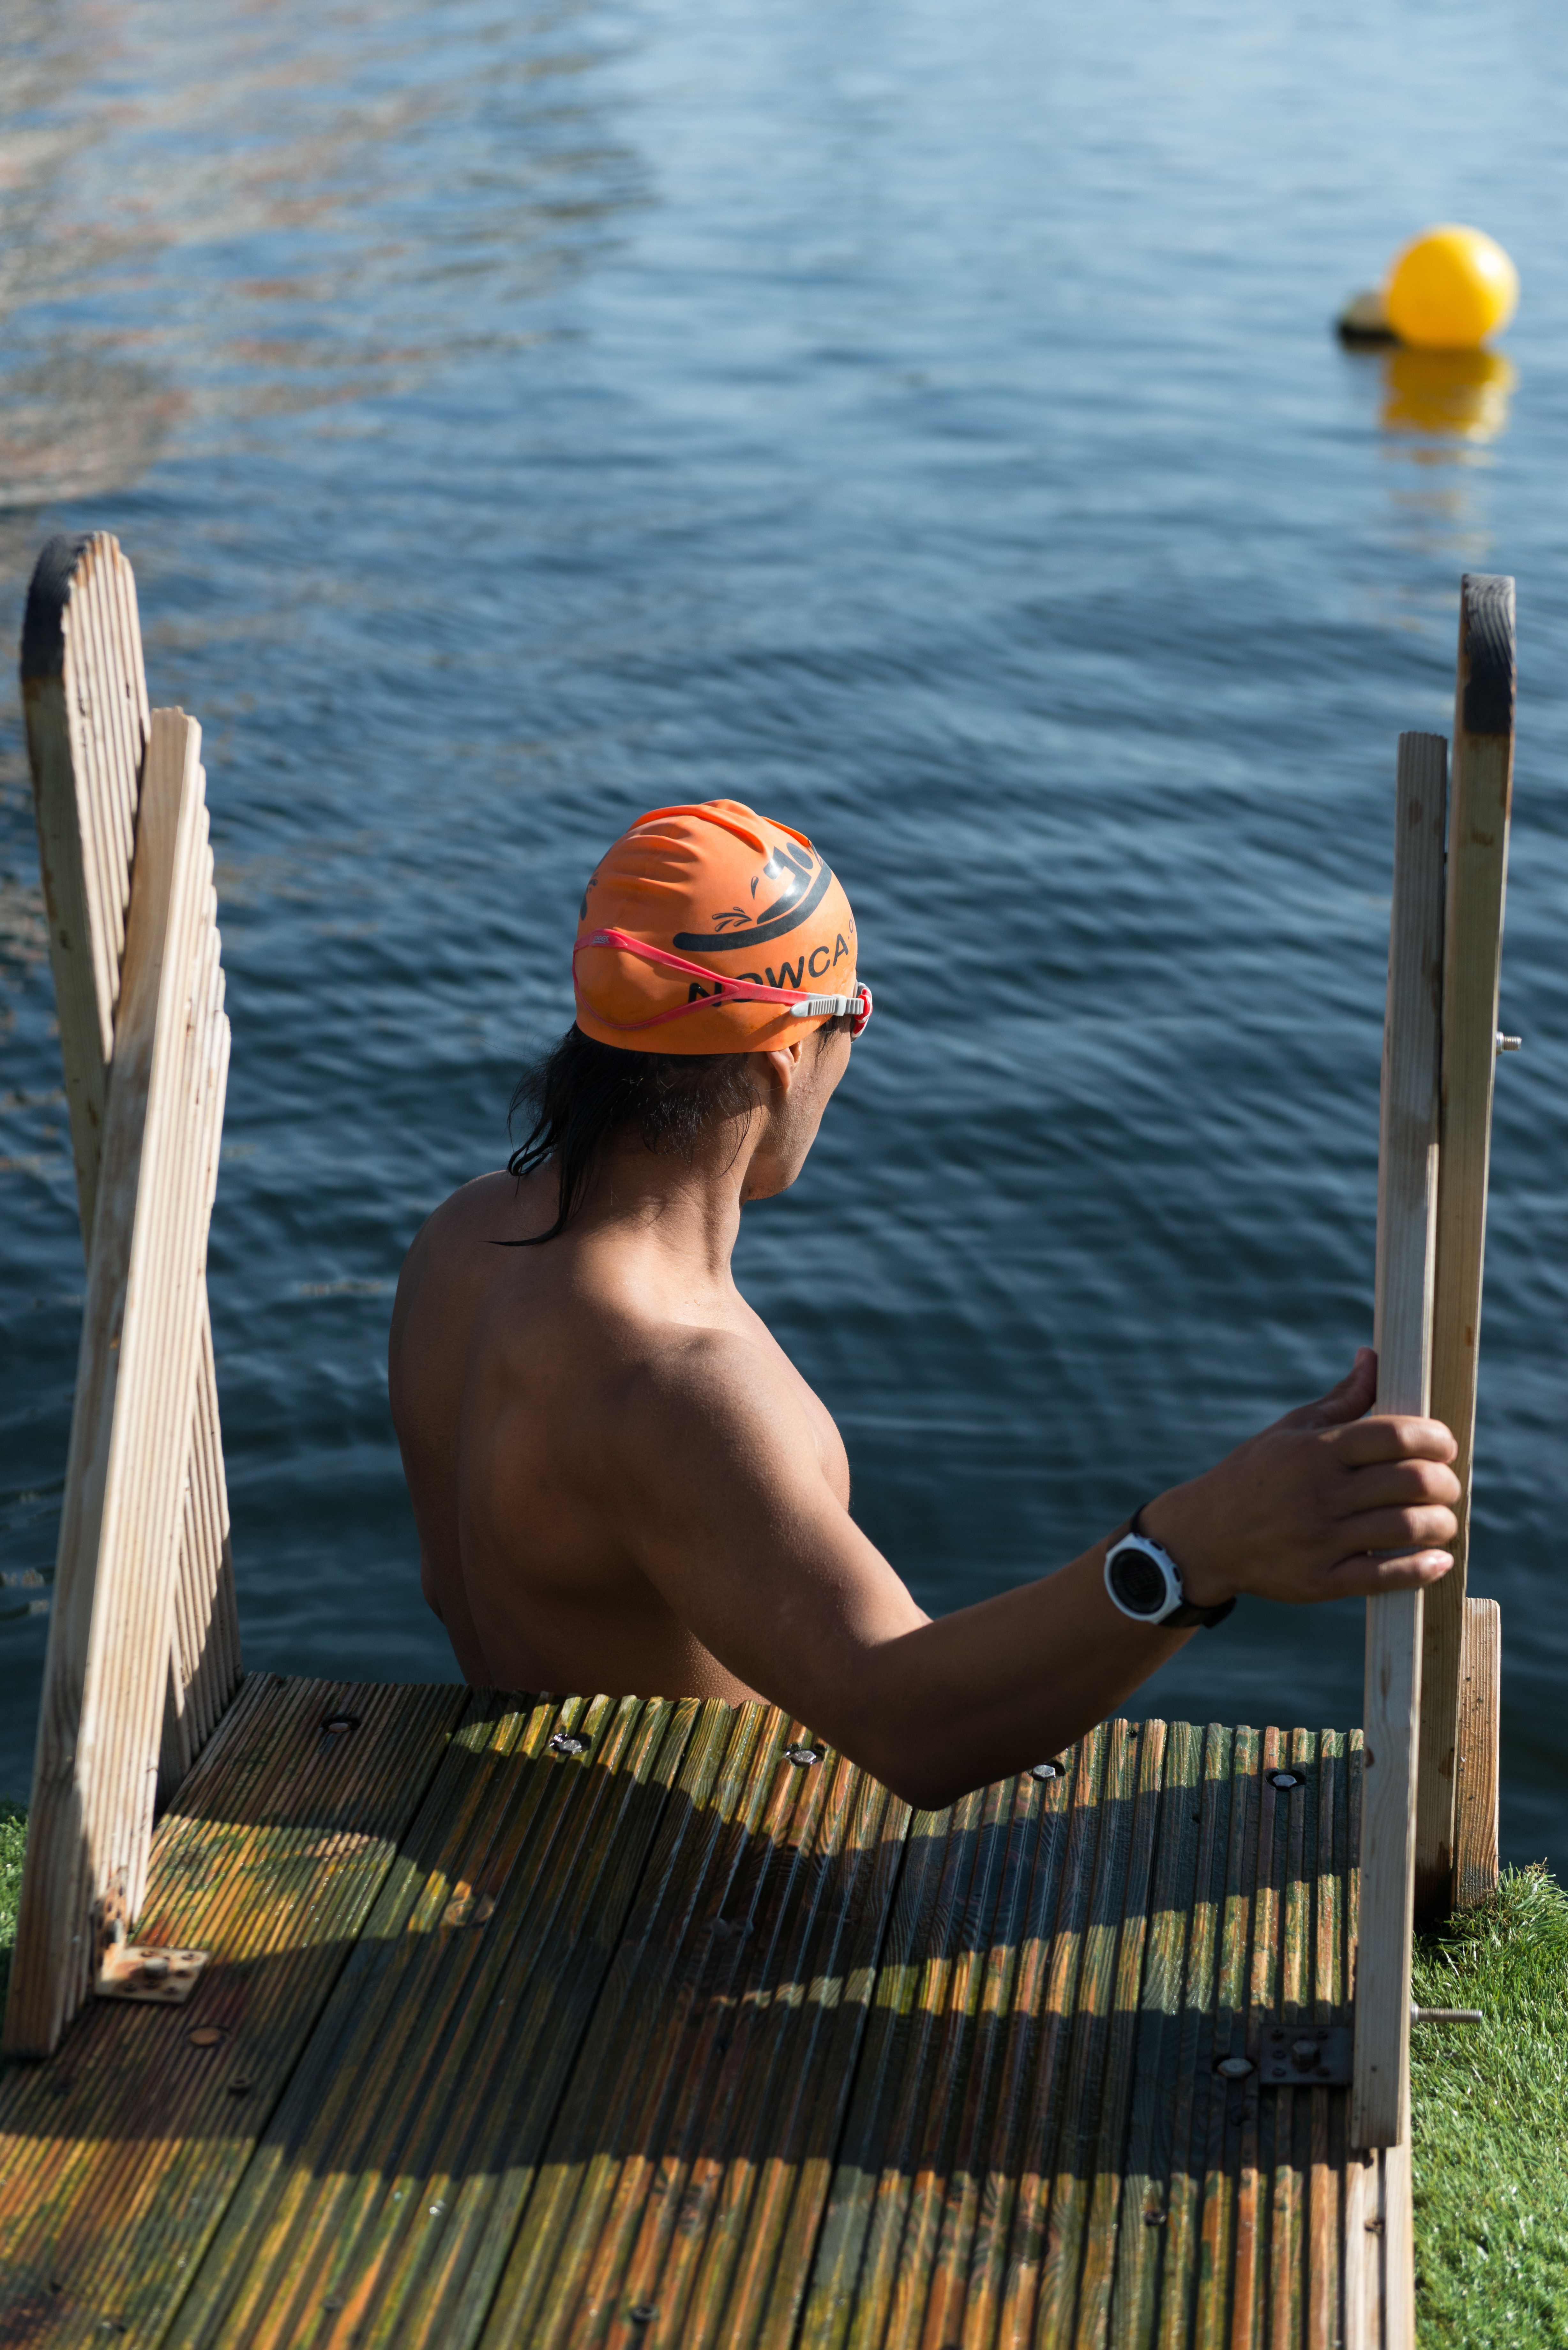 A swimmer in an orange cap about to set out from the dock edge